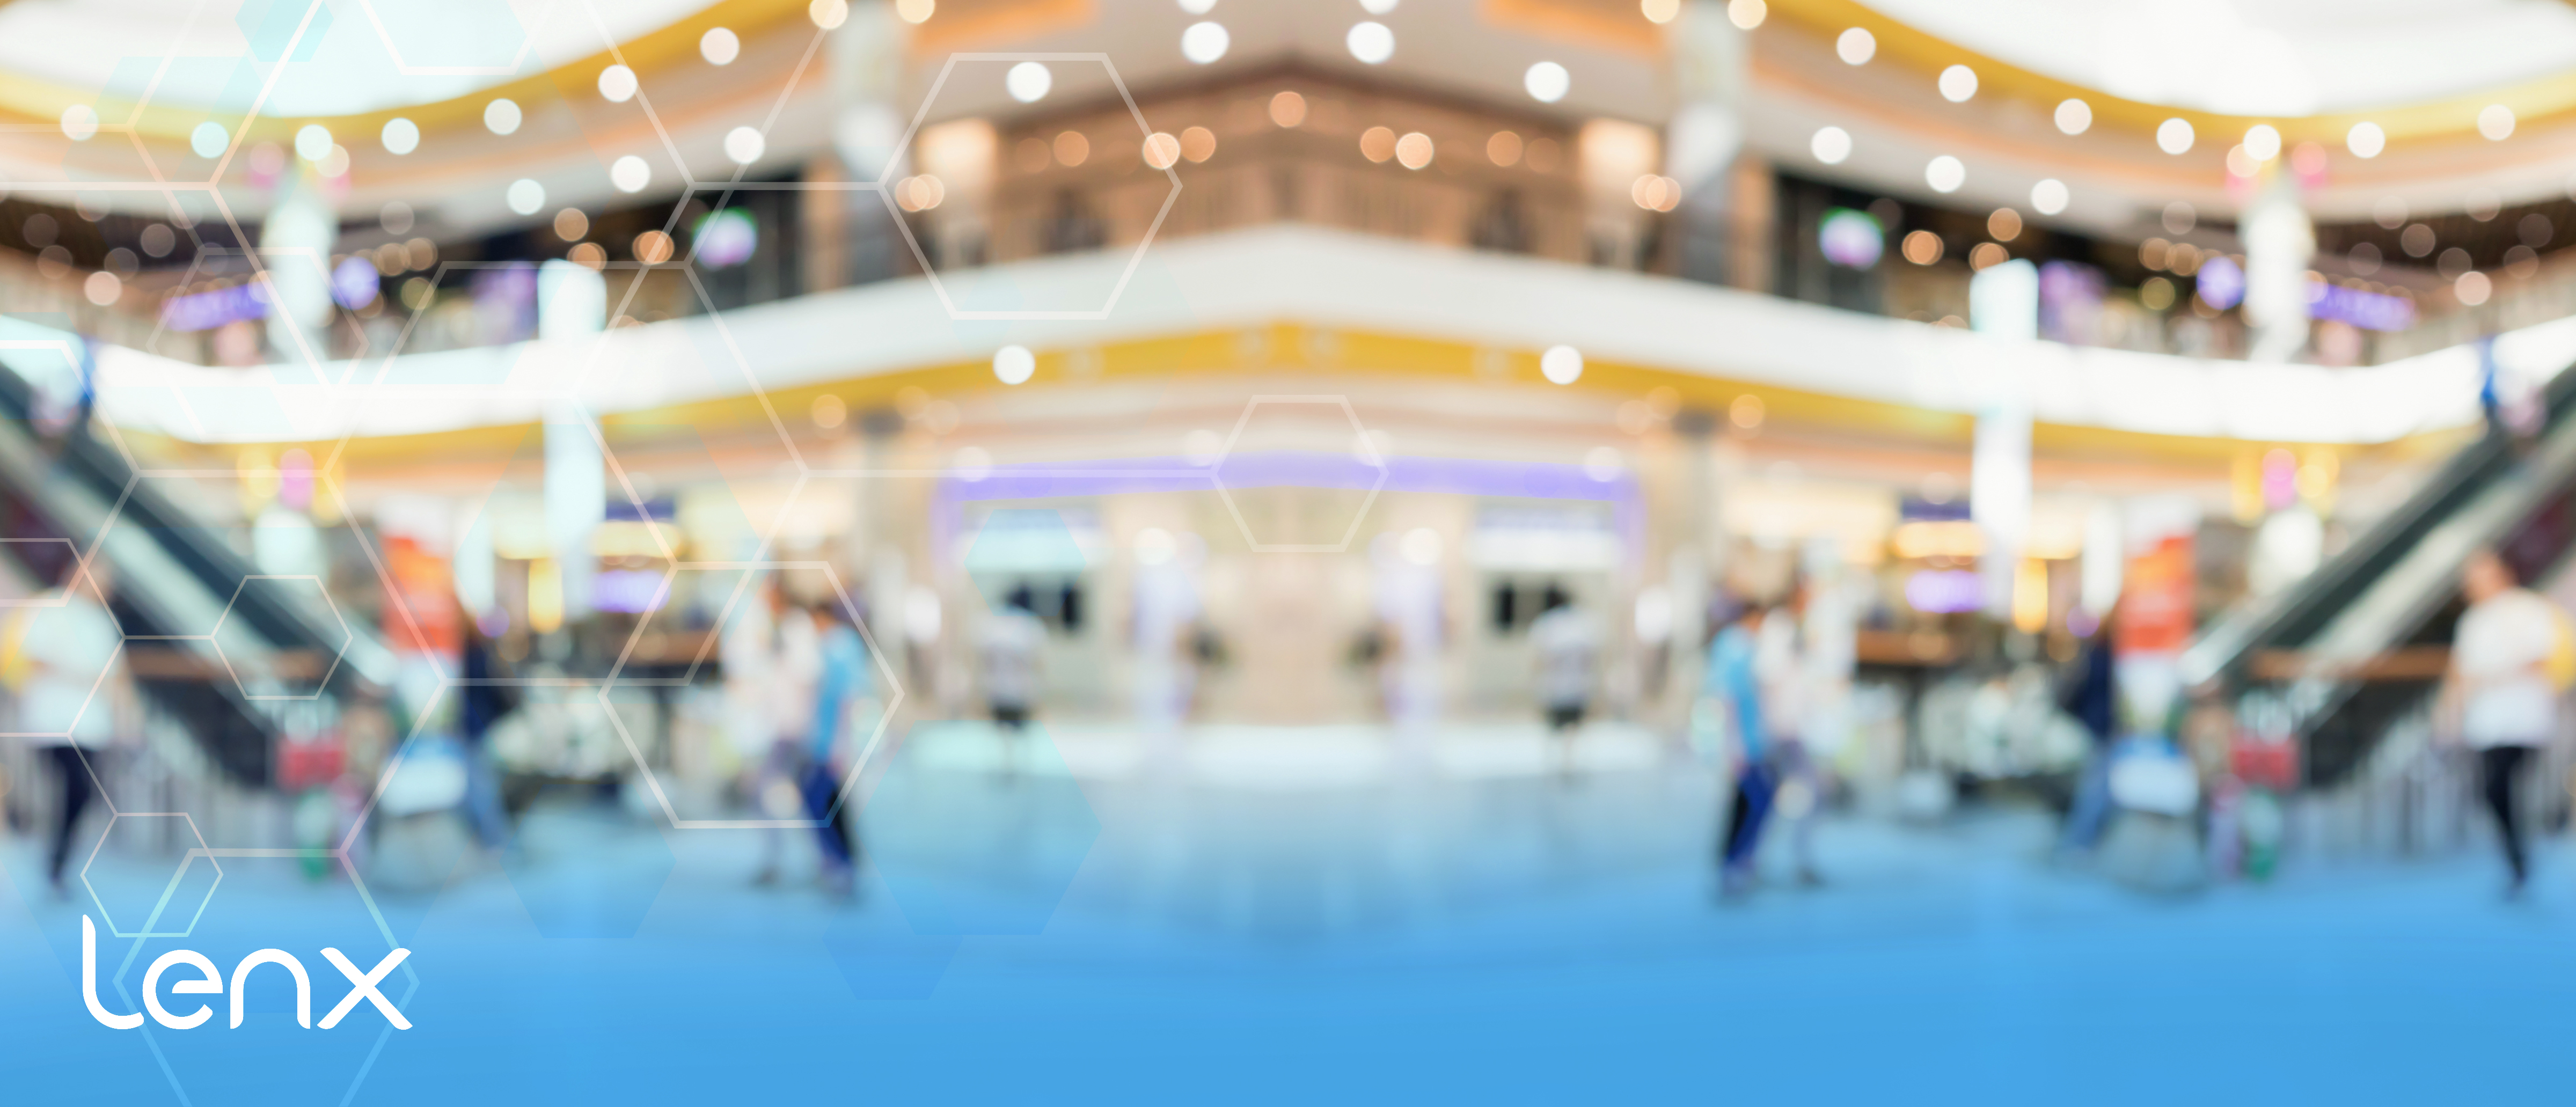 Why AI Security, Active Shooter Detection Systems Are Perfect For Large Retail Spaces